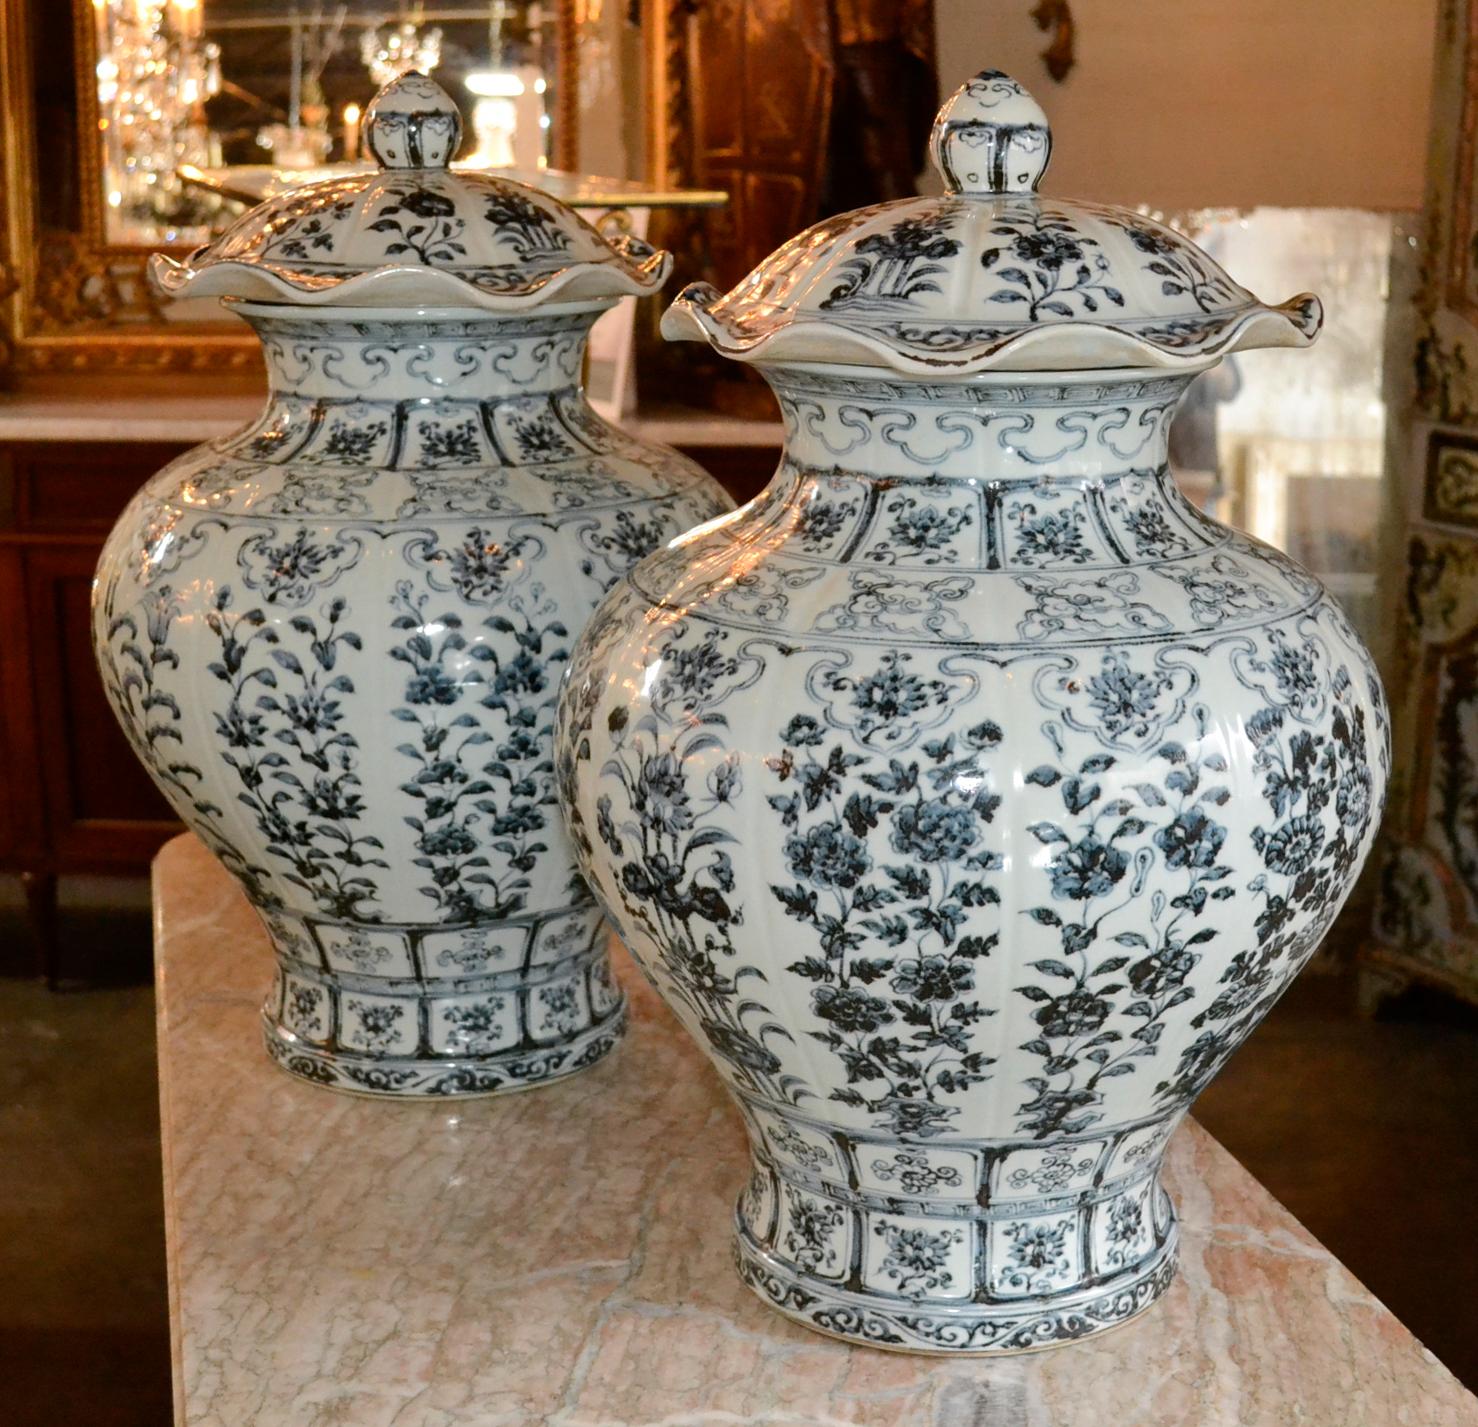 Chinese Pair of Blue and White Jars